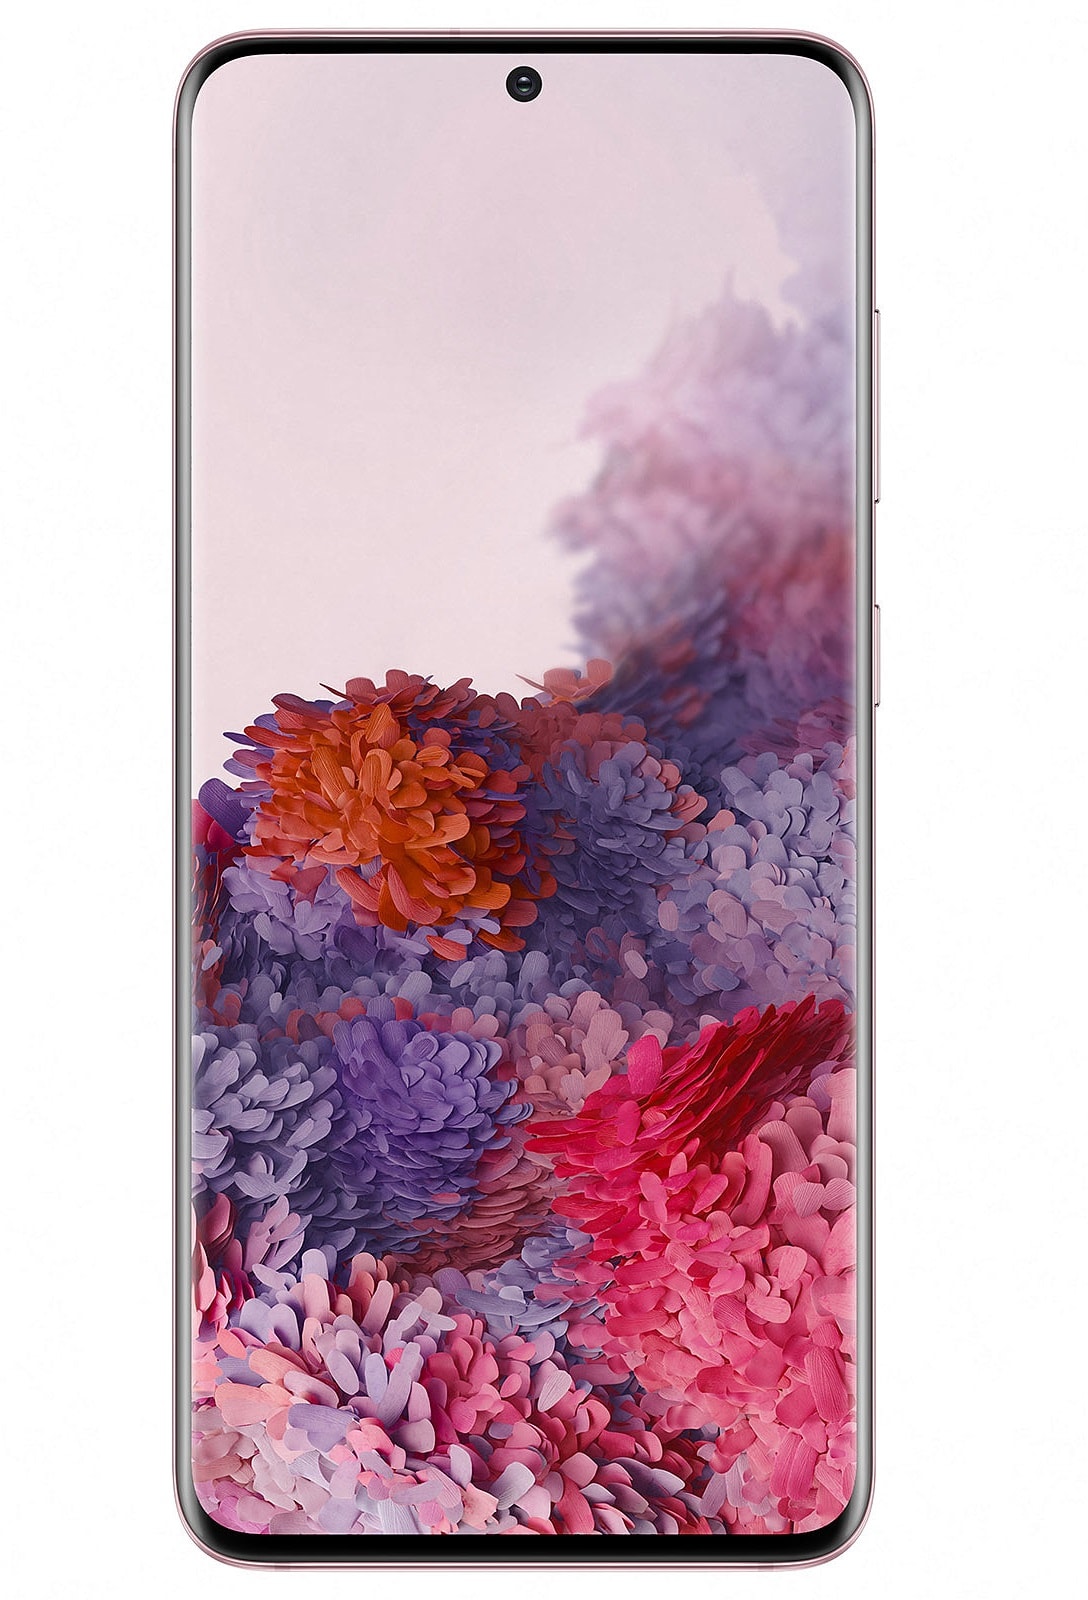 Samsung Galaxy S20 rose 128 Go pas cher - Smartphone - Achat moins cher